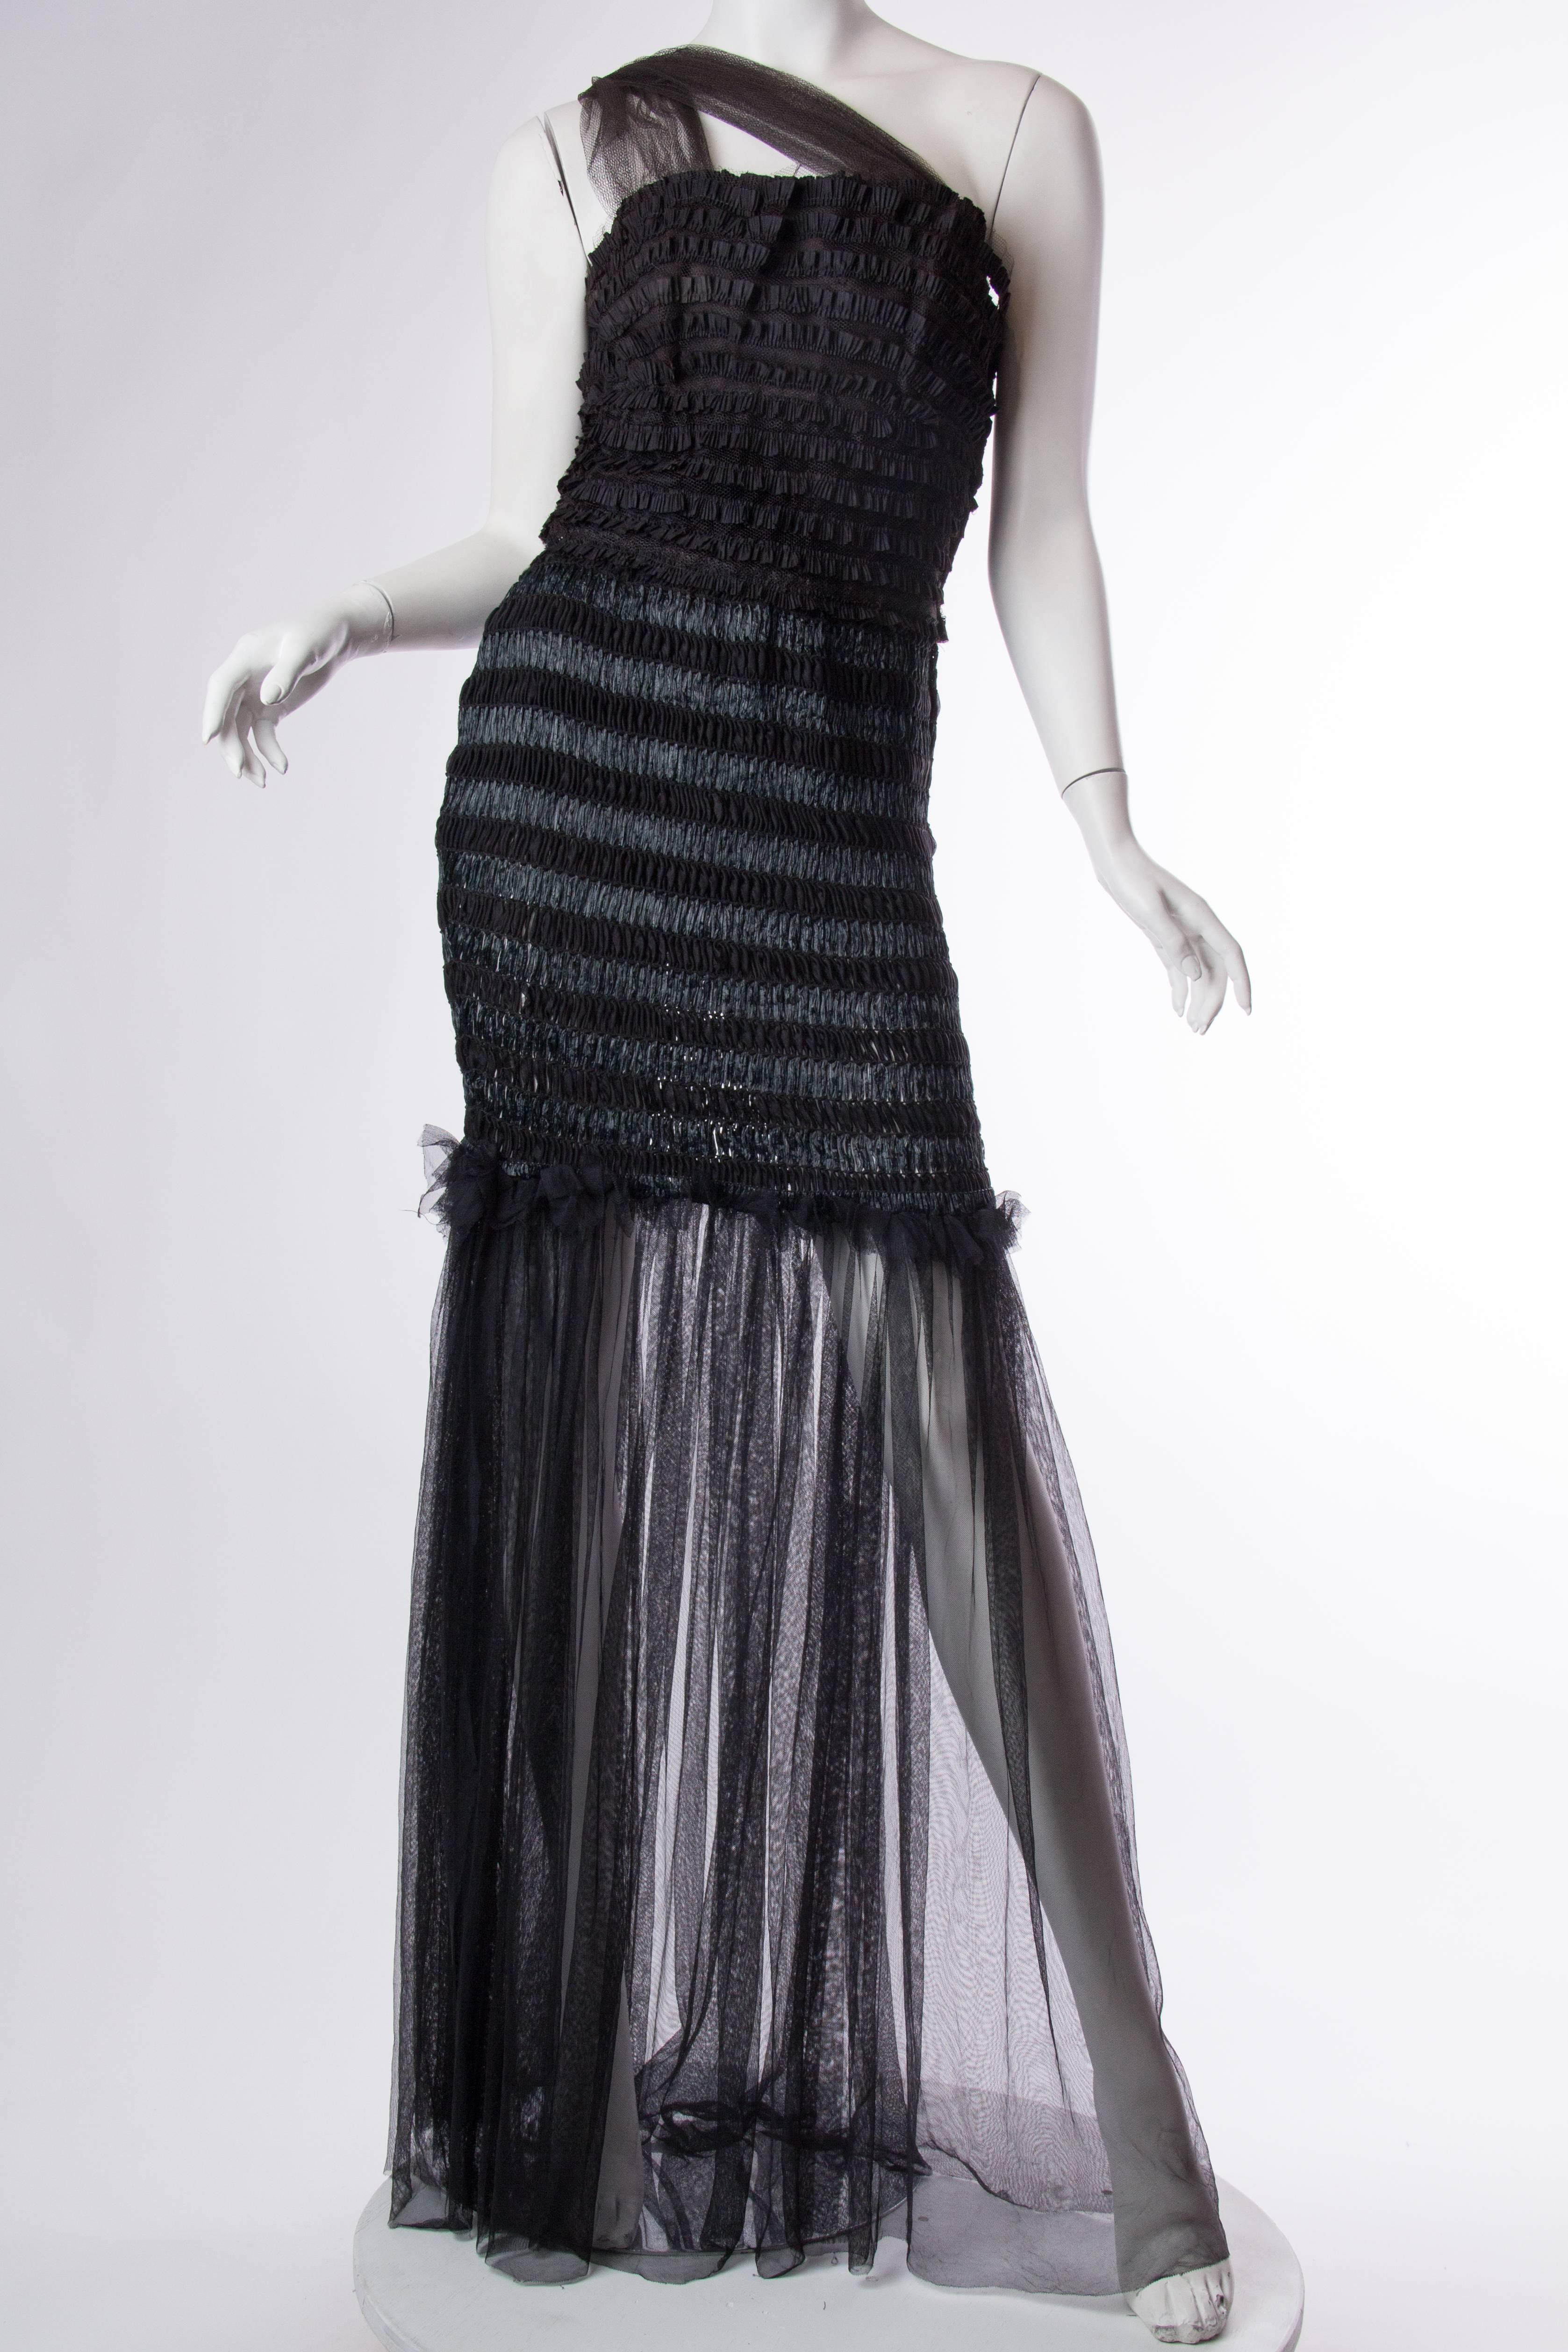 Rebuilt from several elements from the 1950s this dress takes the designs of the past and makes them current for today. 